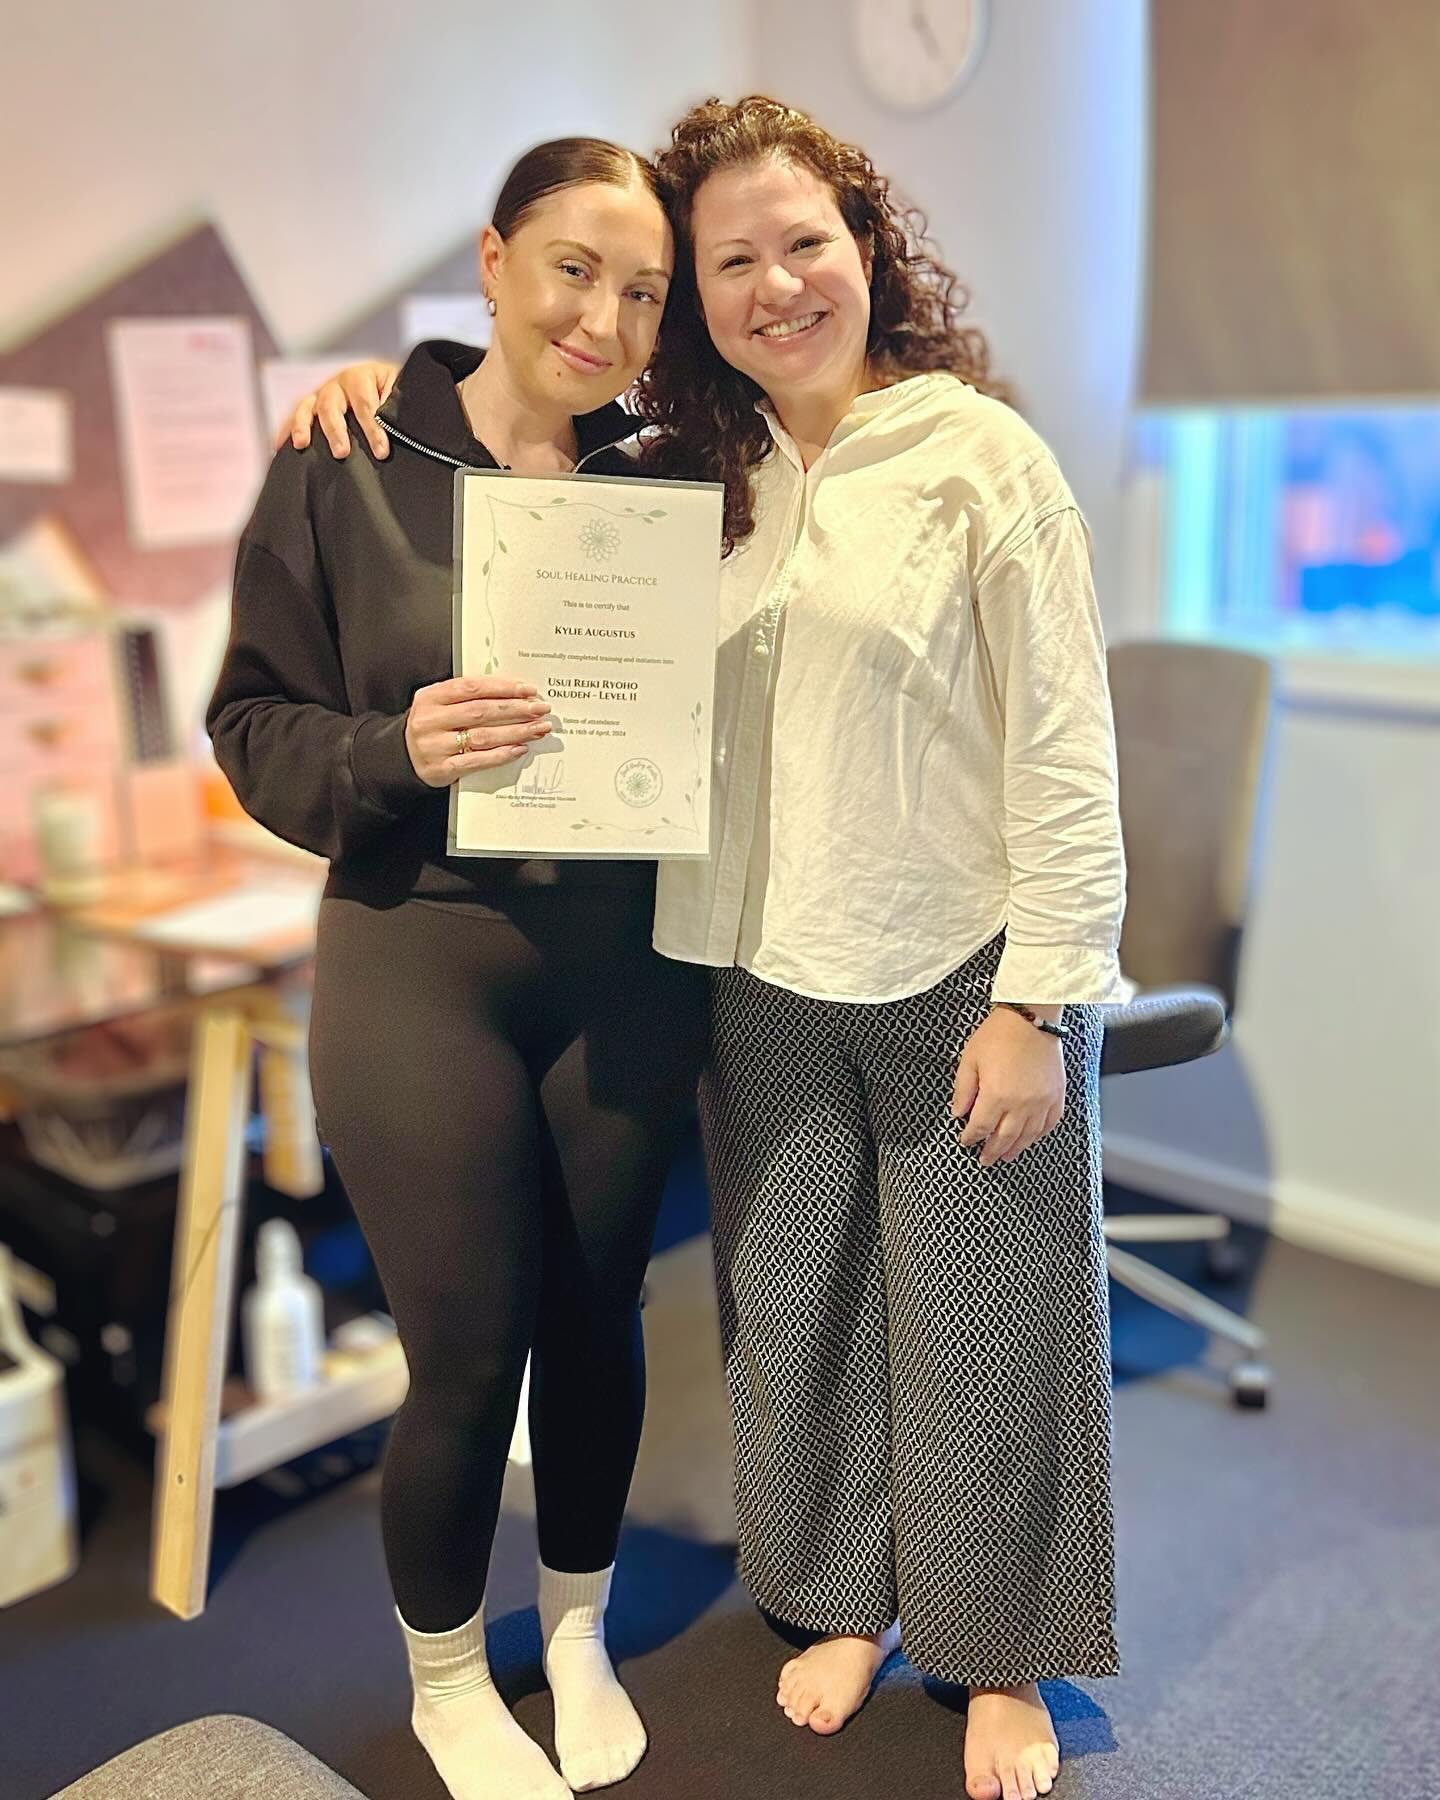 What an amazing weekend spent with a very special soul @ftbl_mum 💛
The Inner Teachings of Okuden Reiki
Continue sharing your bright light ✨ with the universe Kylie xx
#reiki #reikipractitioner #reiki2 #reikienergy #reikiusui #reikilove #reikiteacher